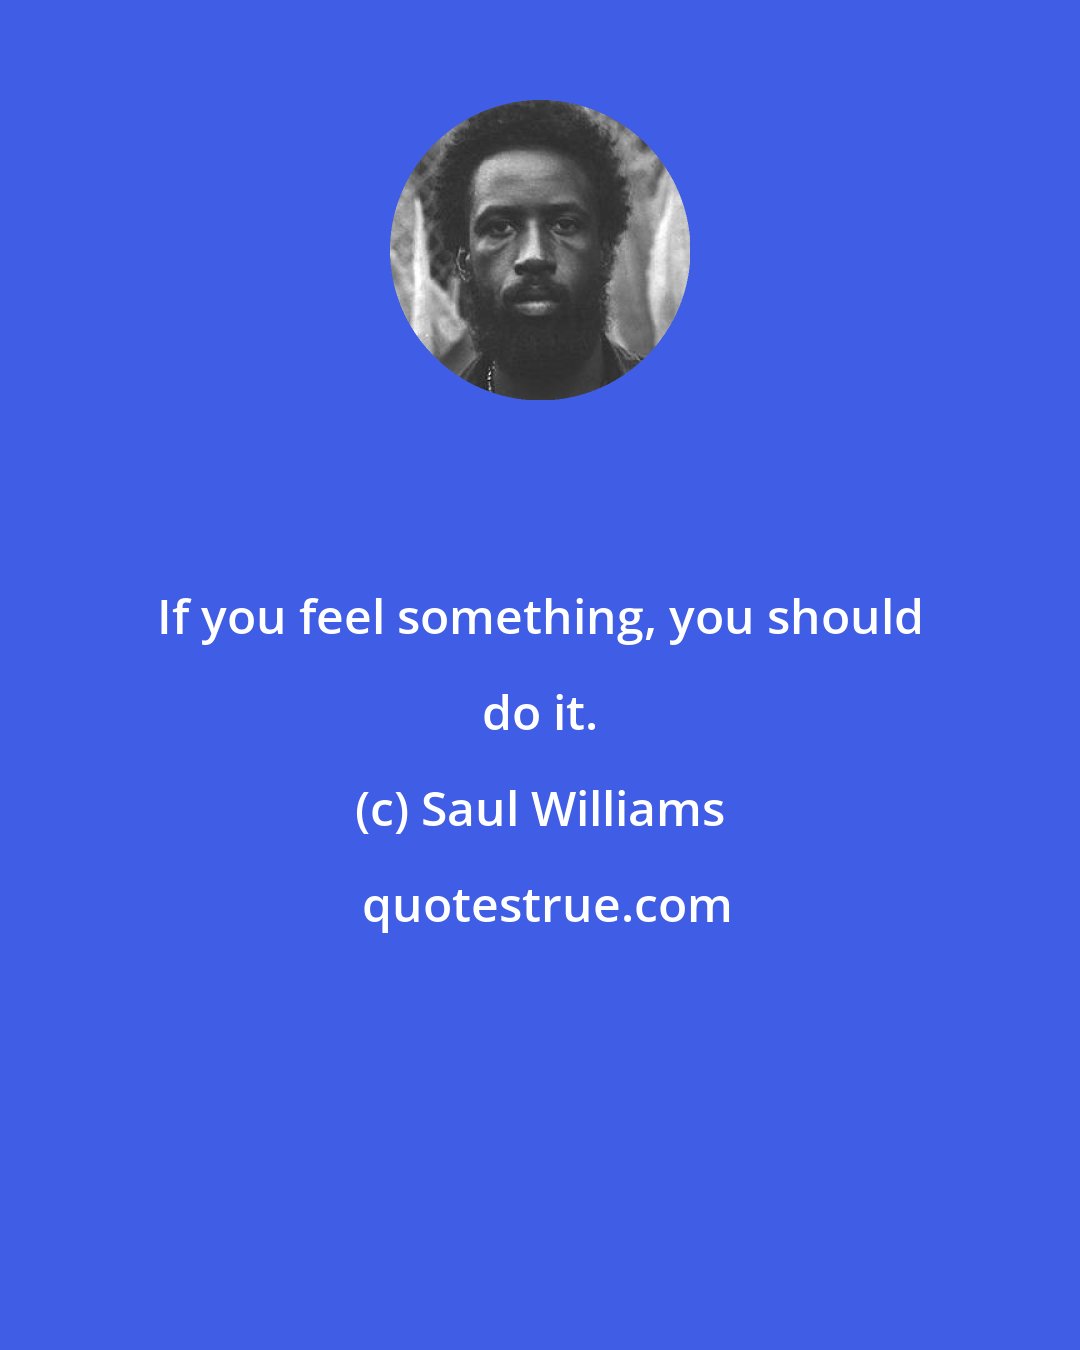 Saul Williams: If you feel something, you should do it.